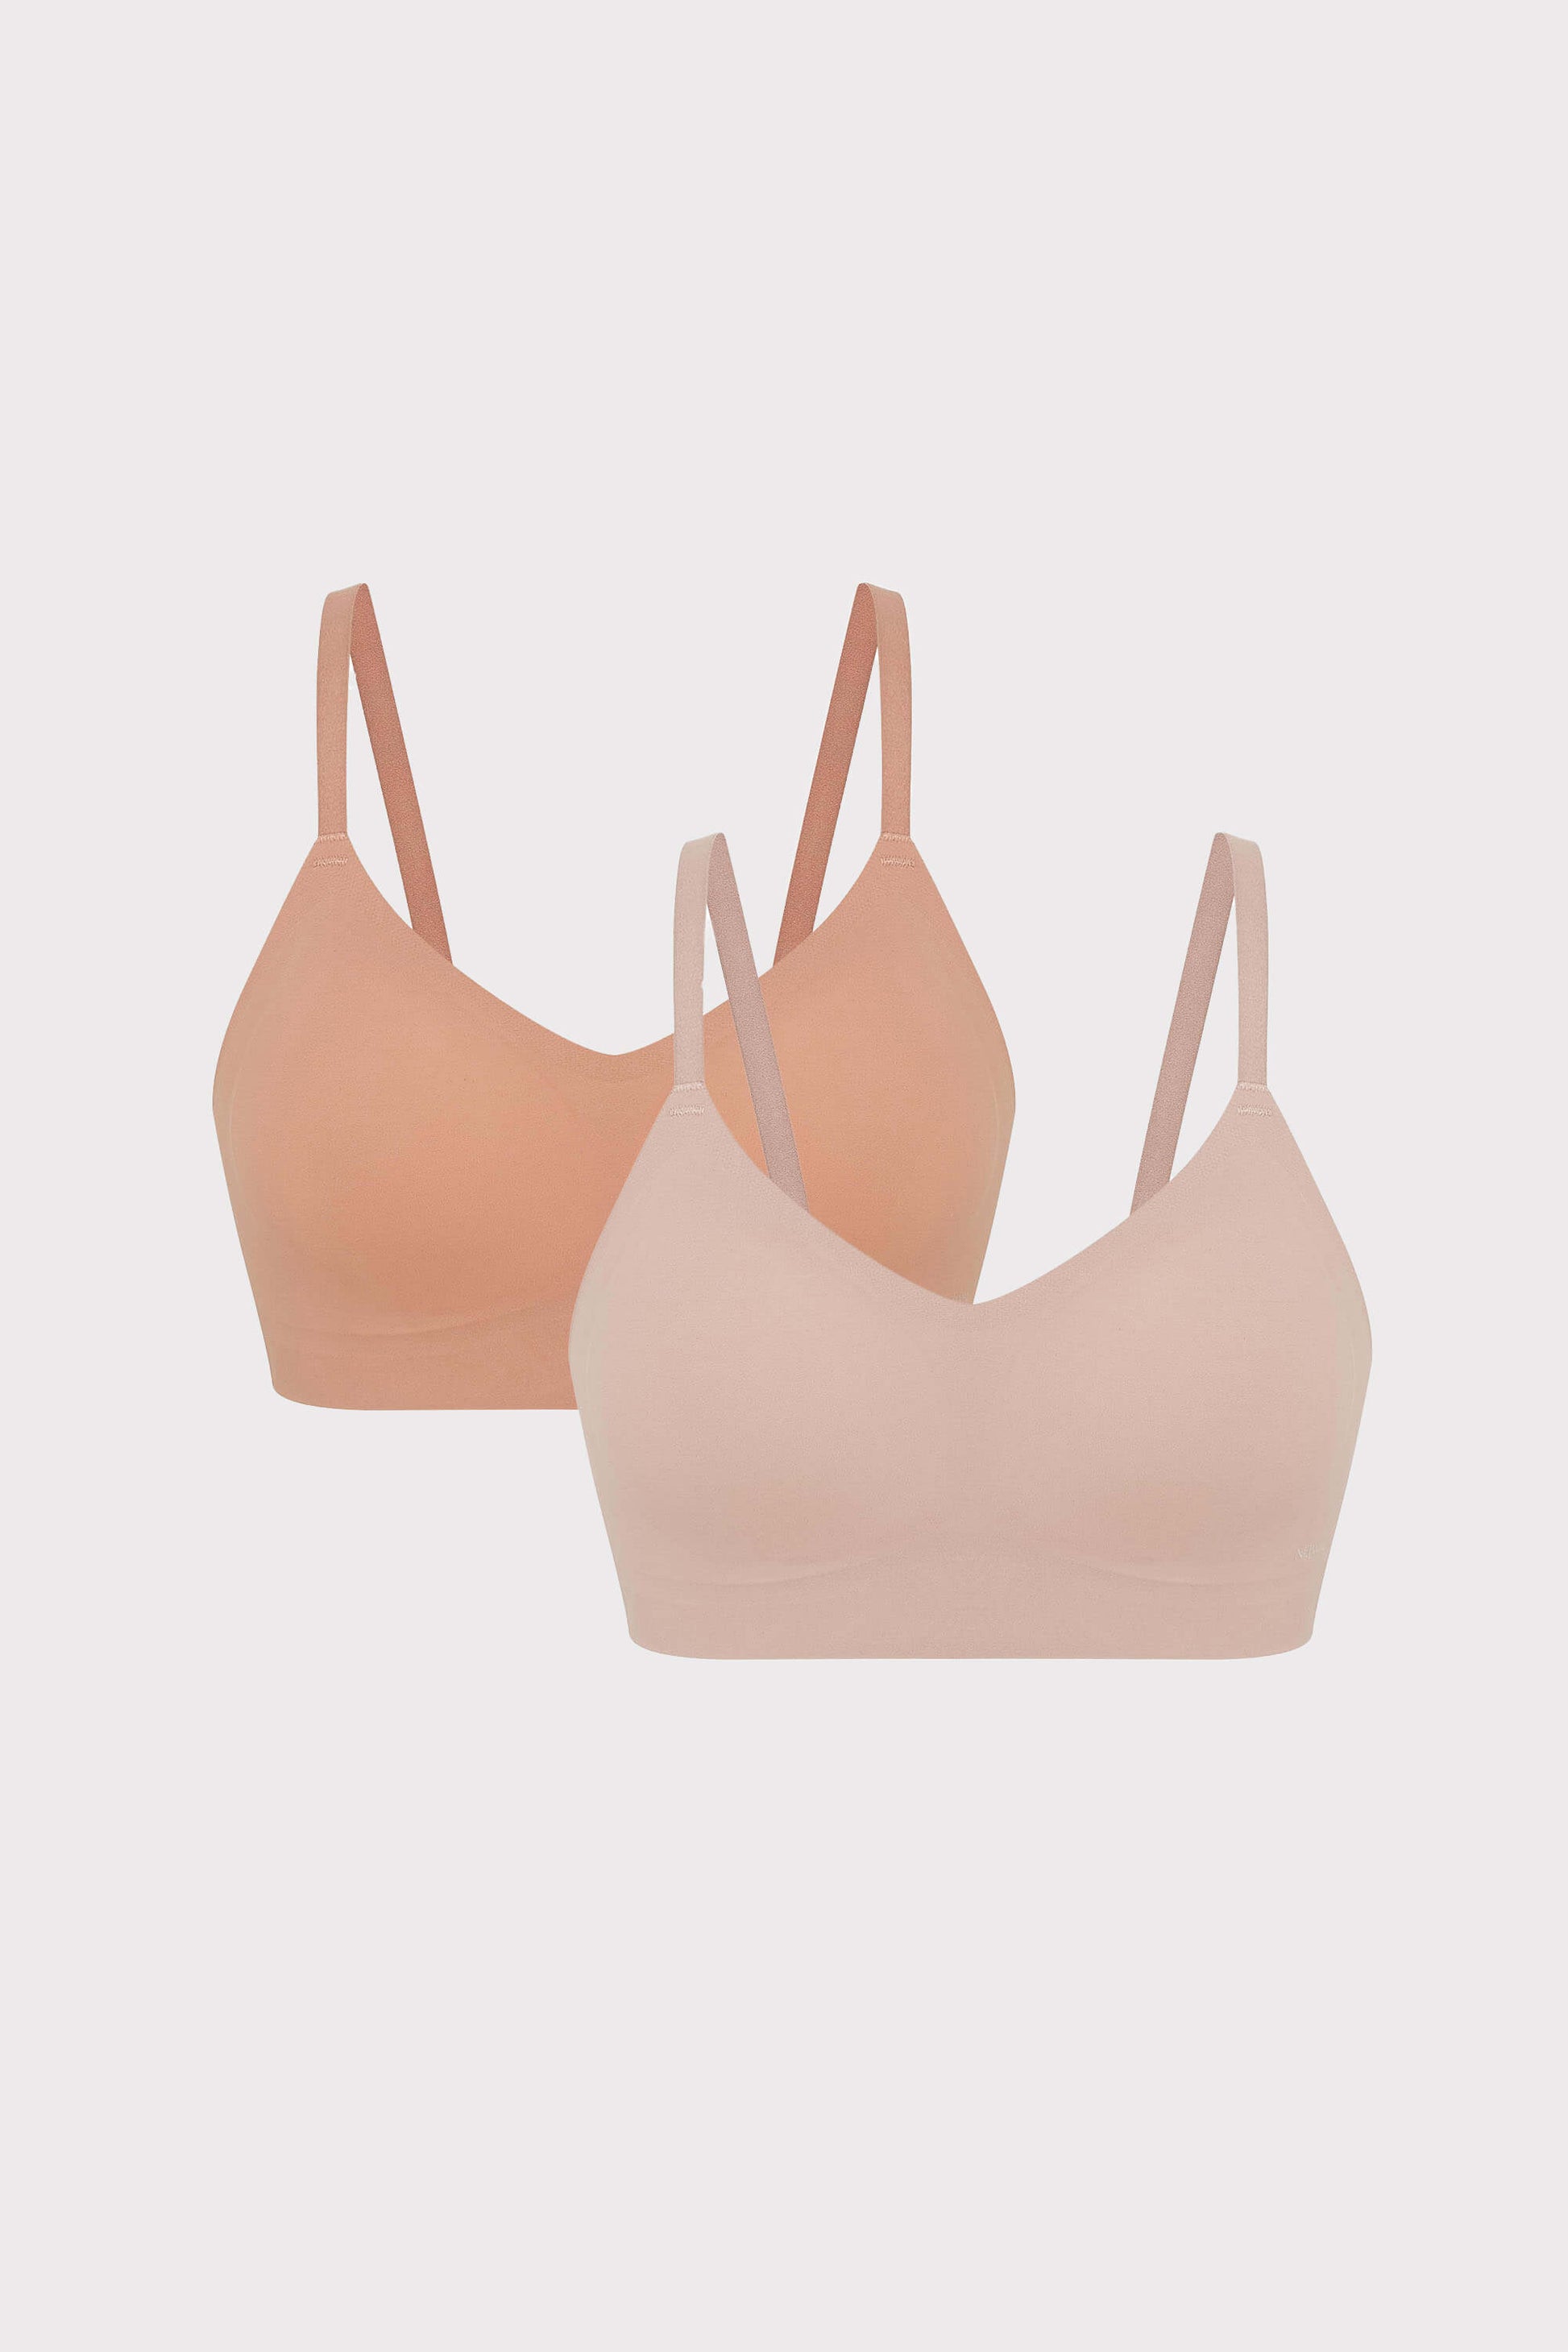 two bras, one in tan and one in beige